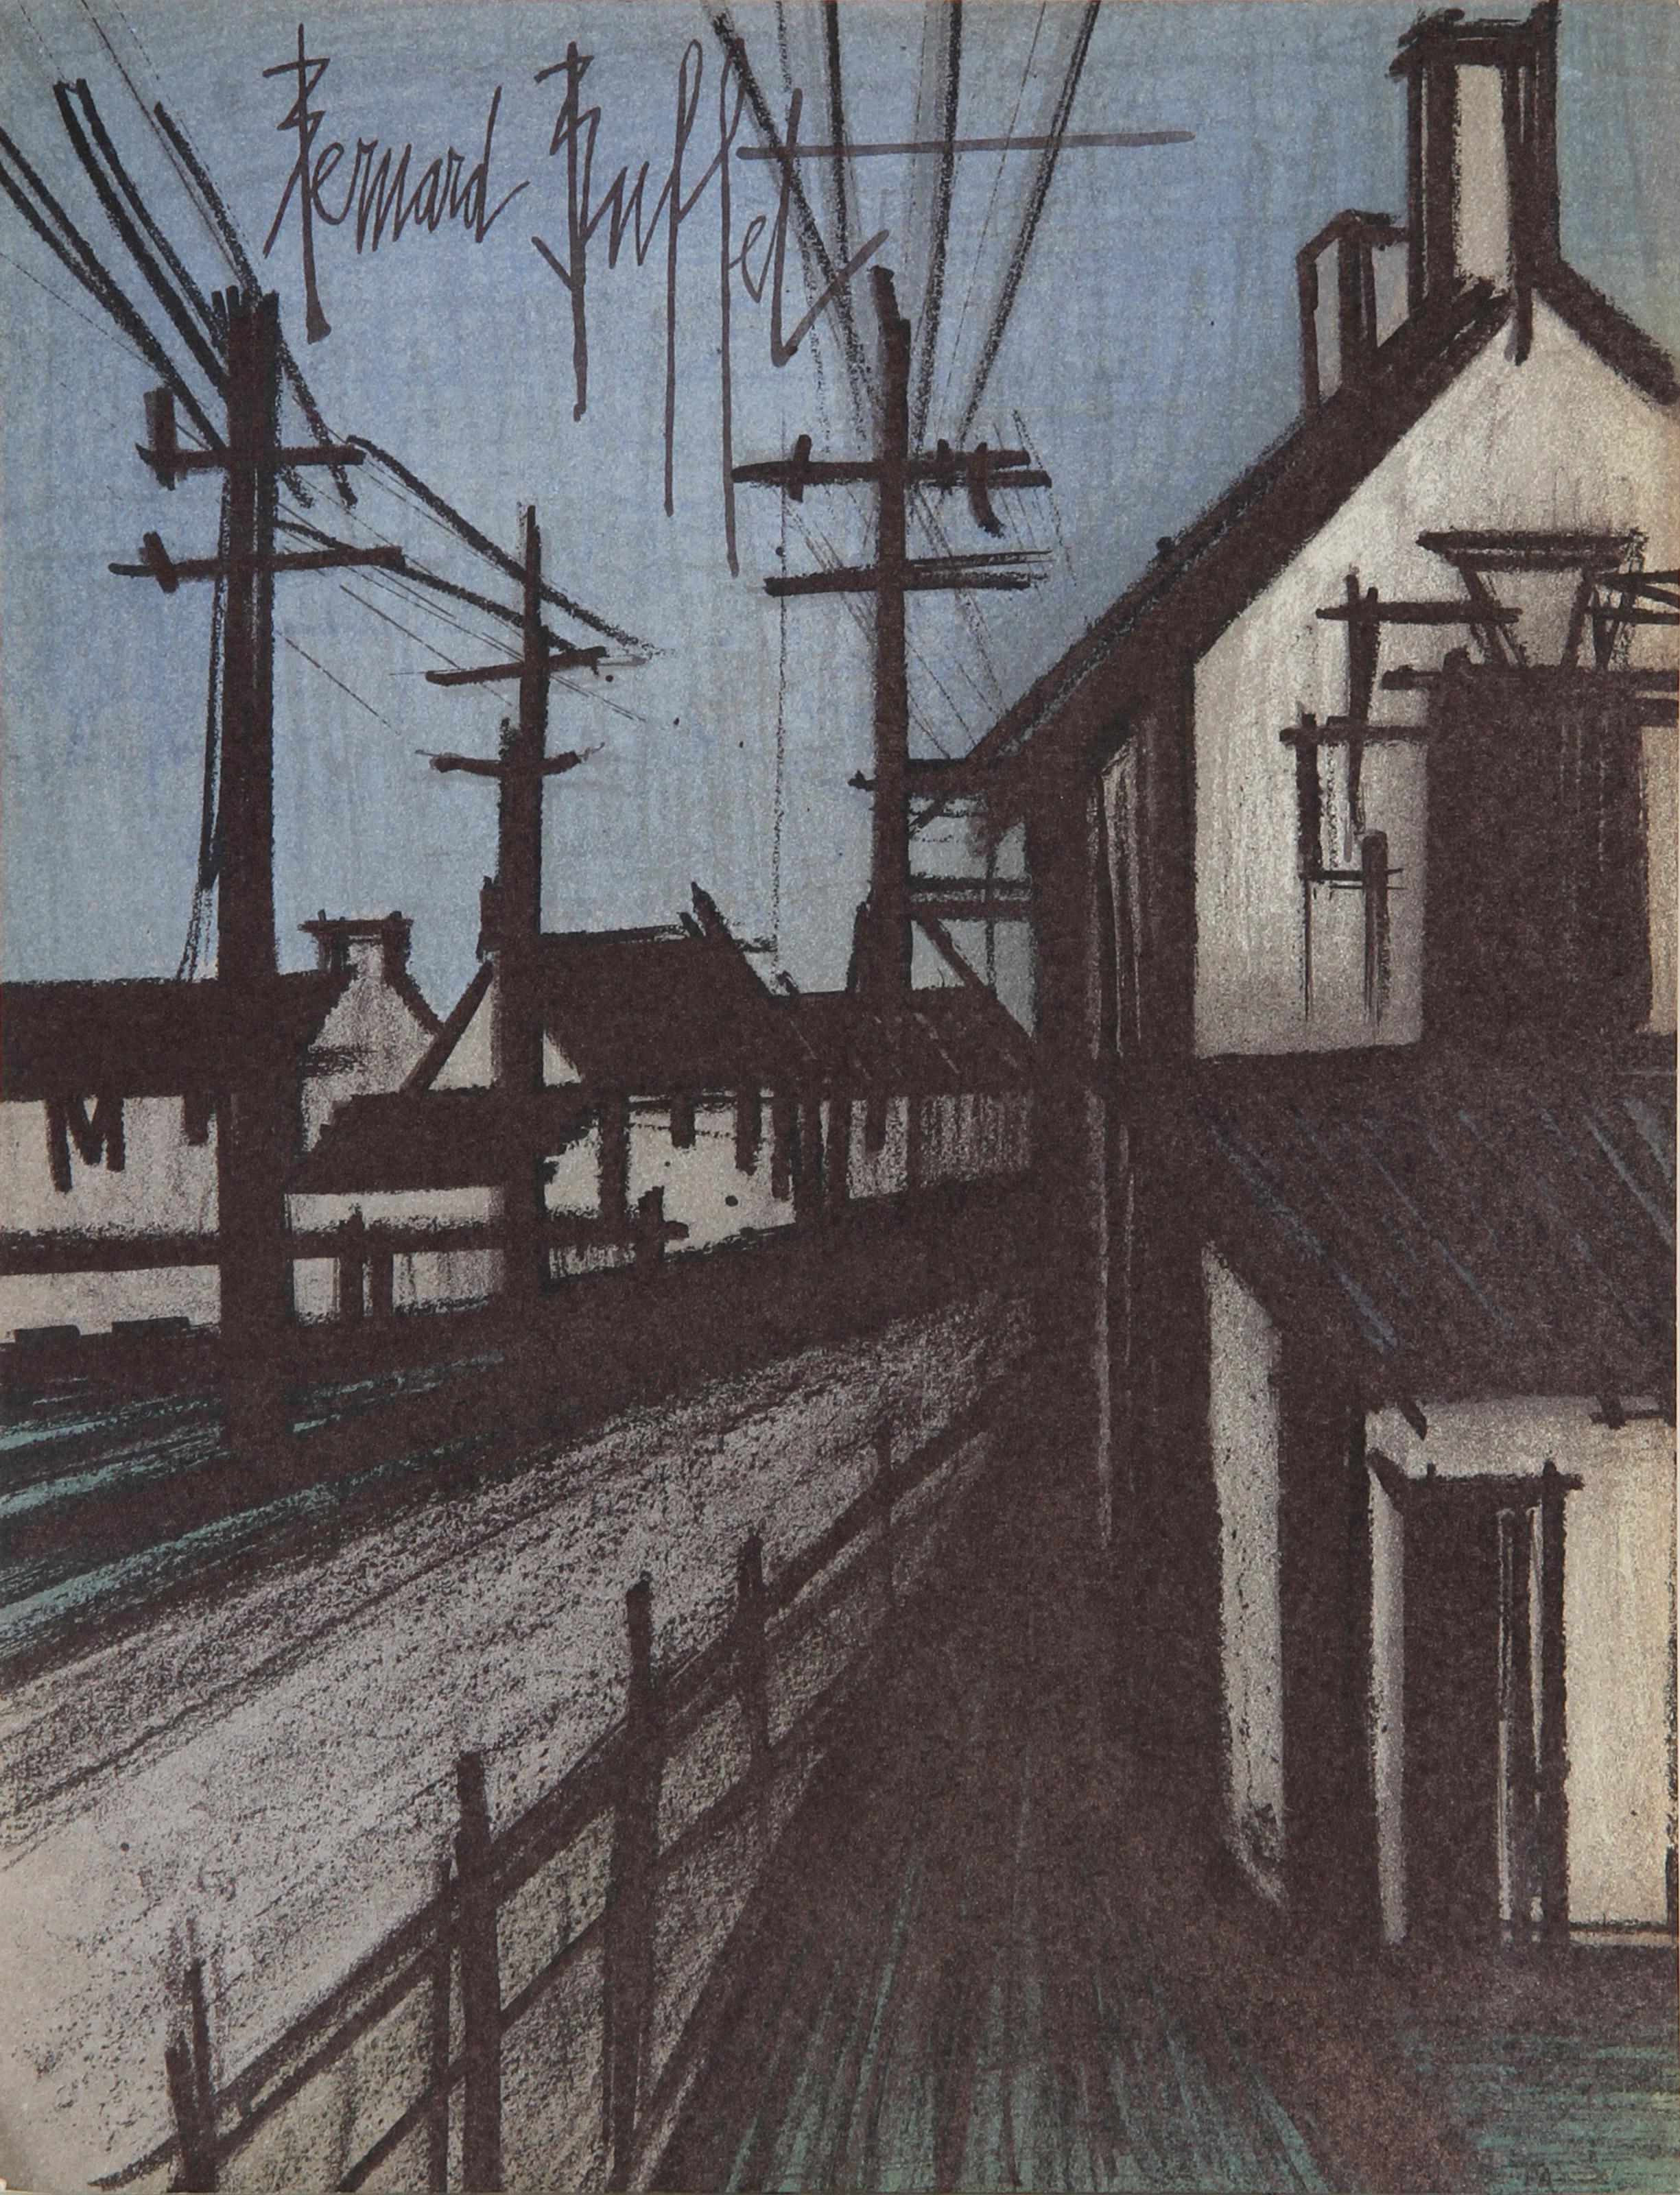 Bernard Buffet, French (1928 - 1999) -  La Route du Village. Year: 1967, Medium: Lithograph, signed in the plate, Size: 13 in. x 10 in. (33.02 cm x 25.4 cm) 